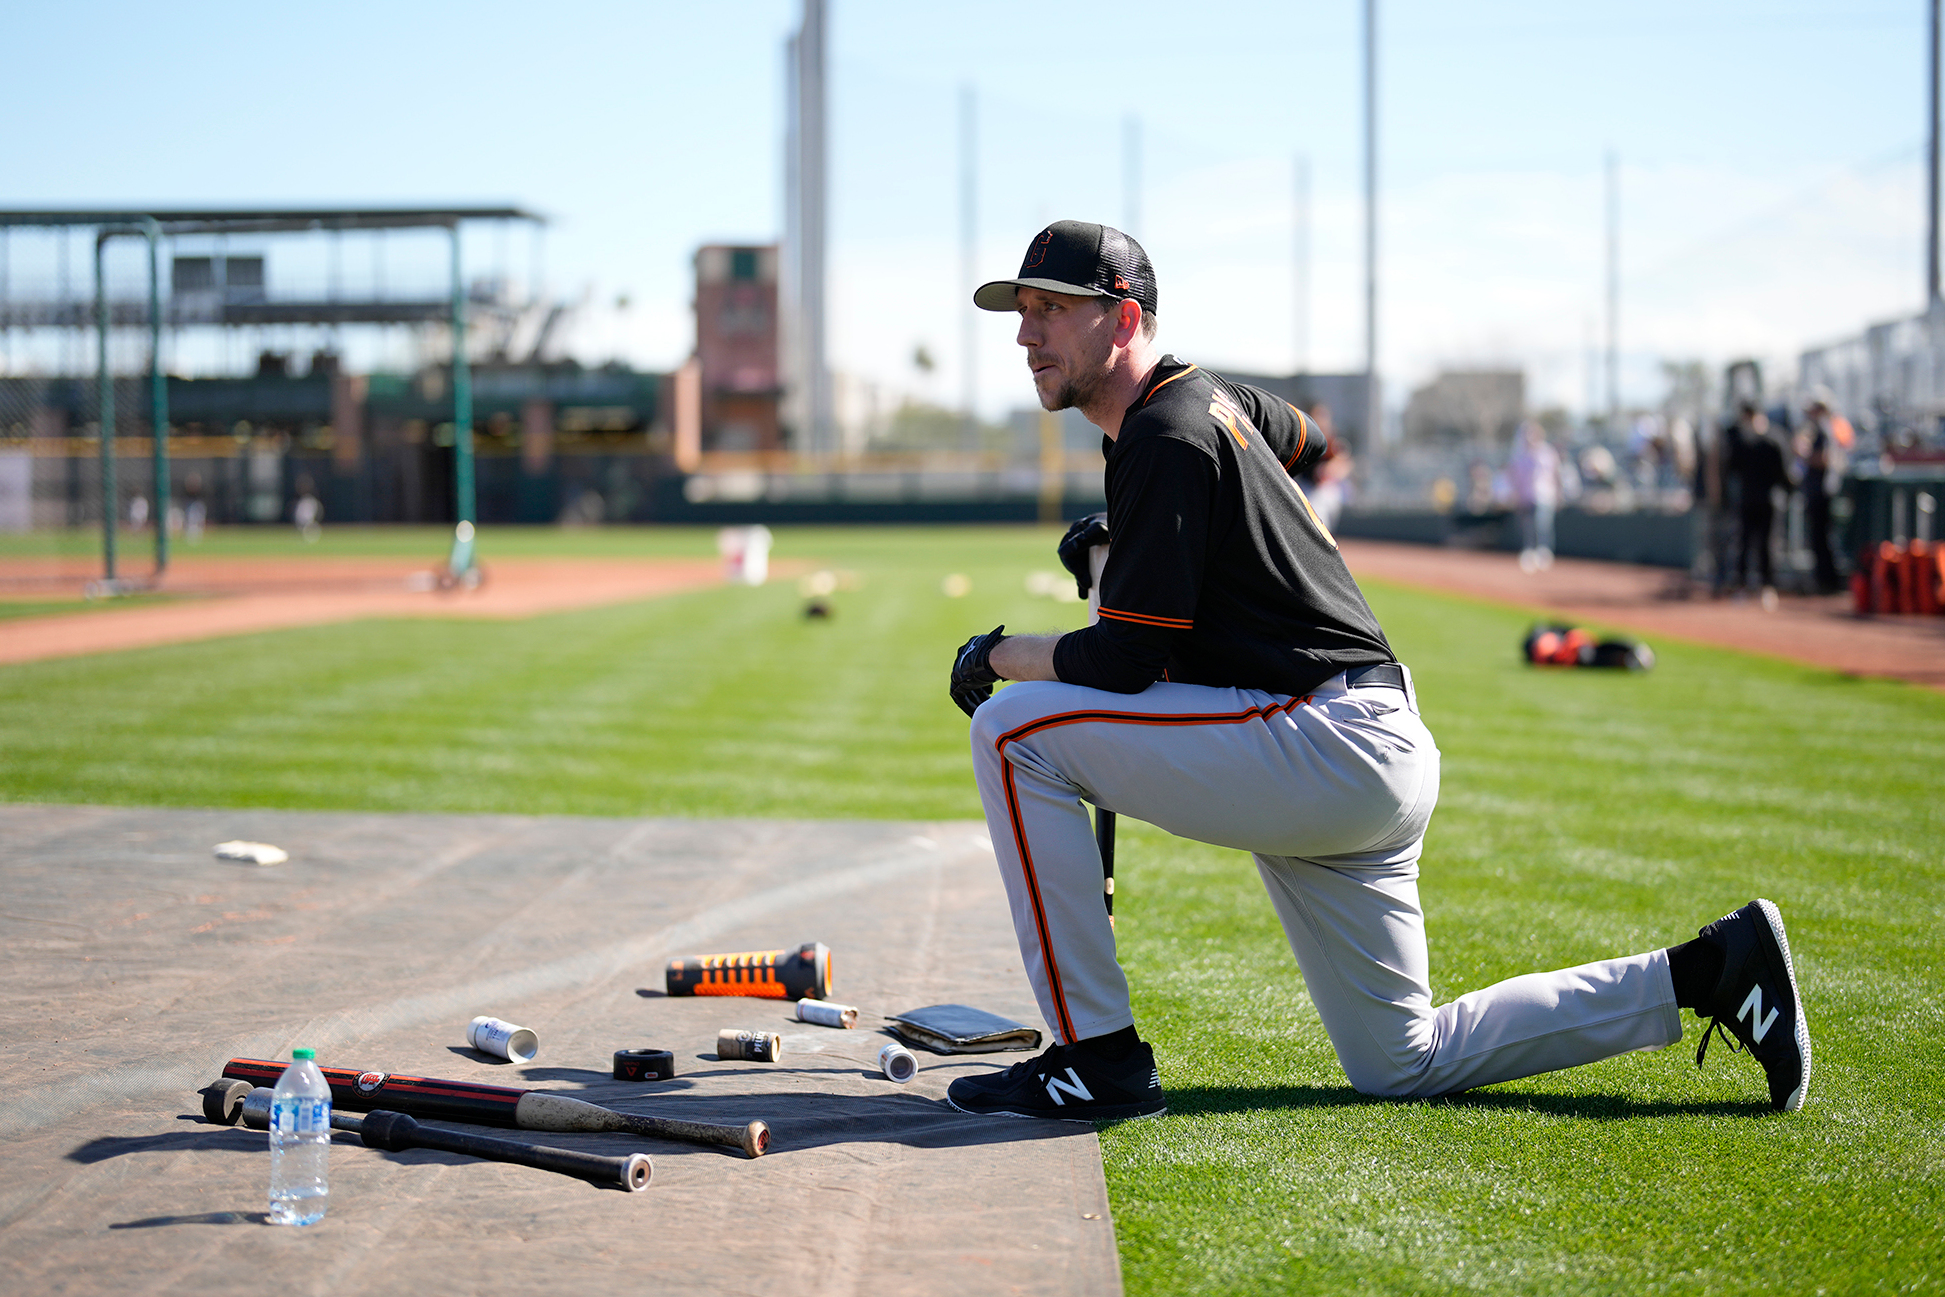 Giants give Stephen Piscotty the means to rediscover big-league skills